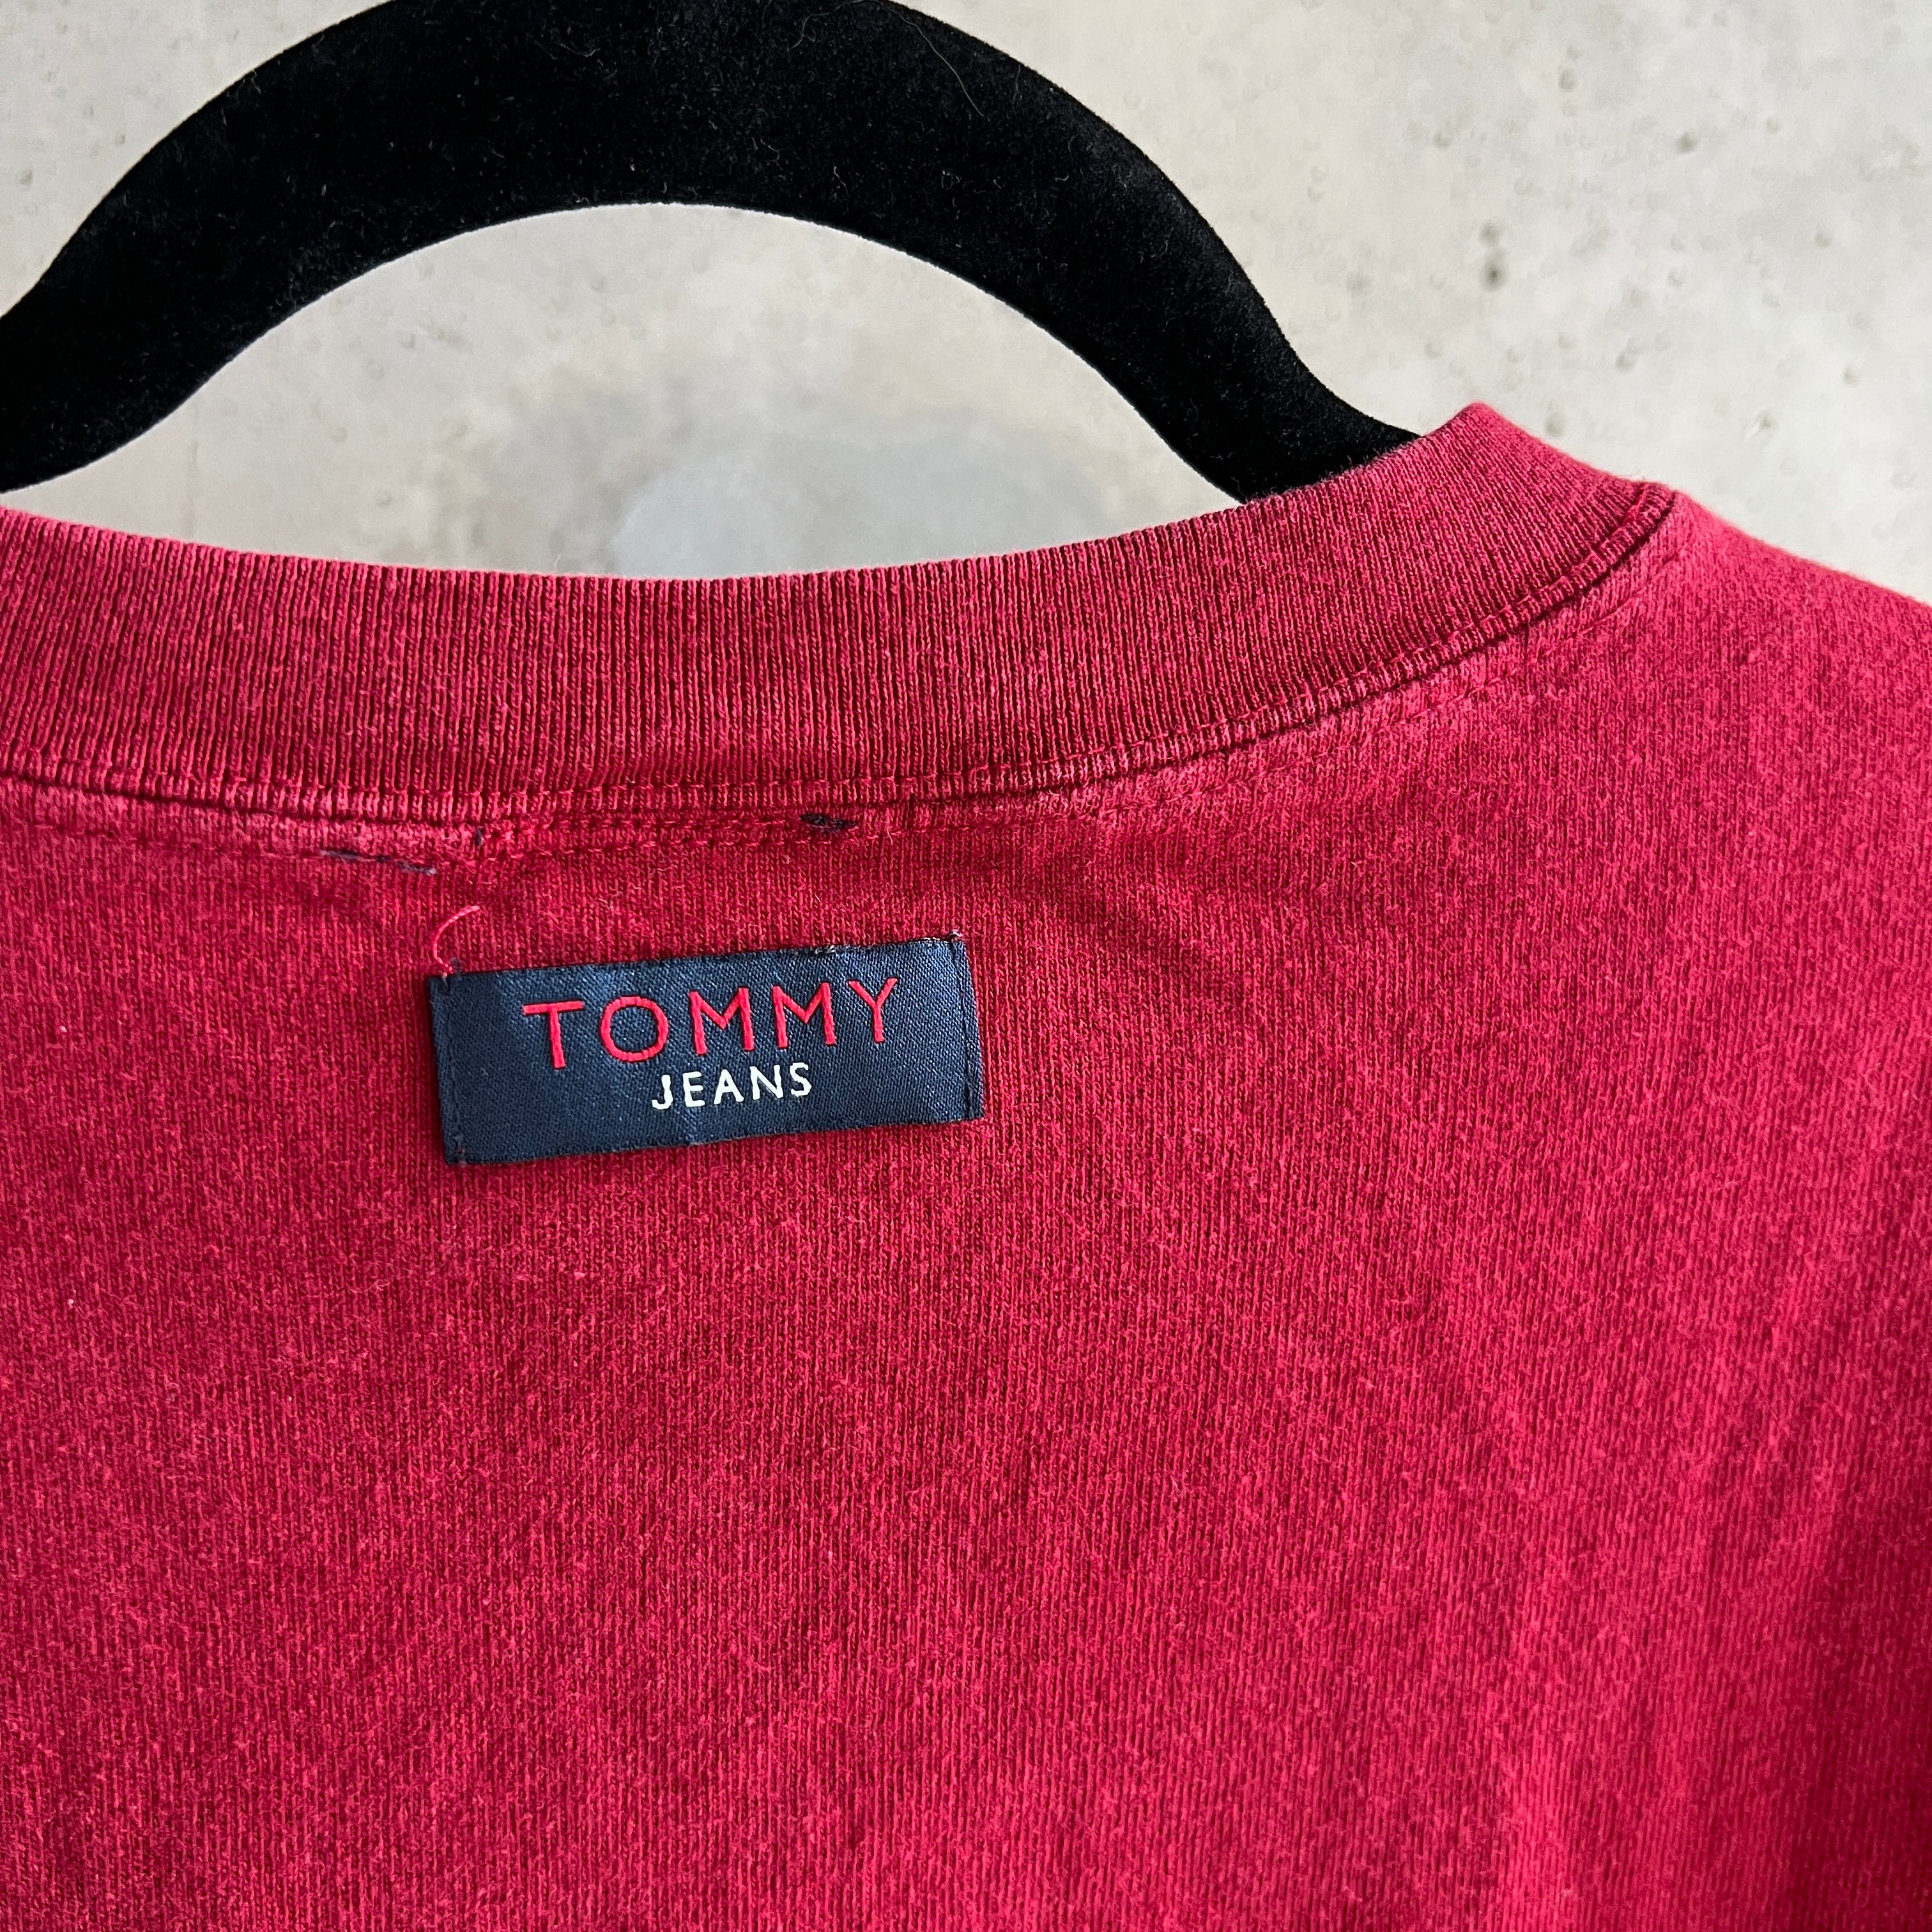 Vintage Tommy Jeans Long Sleeve T-Shirt